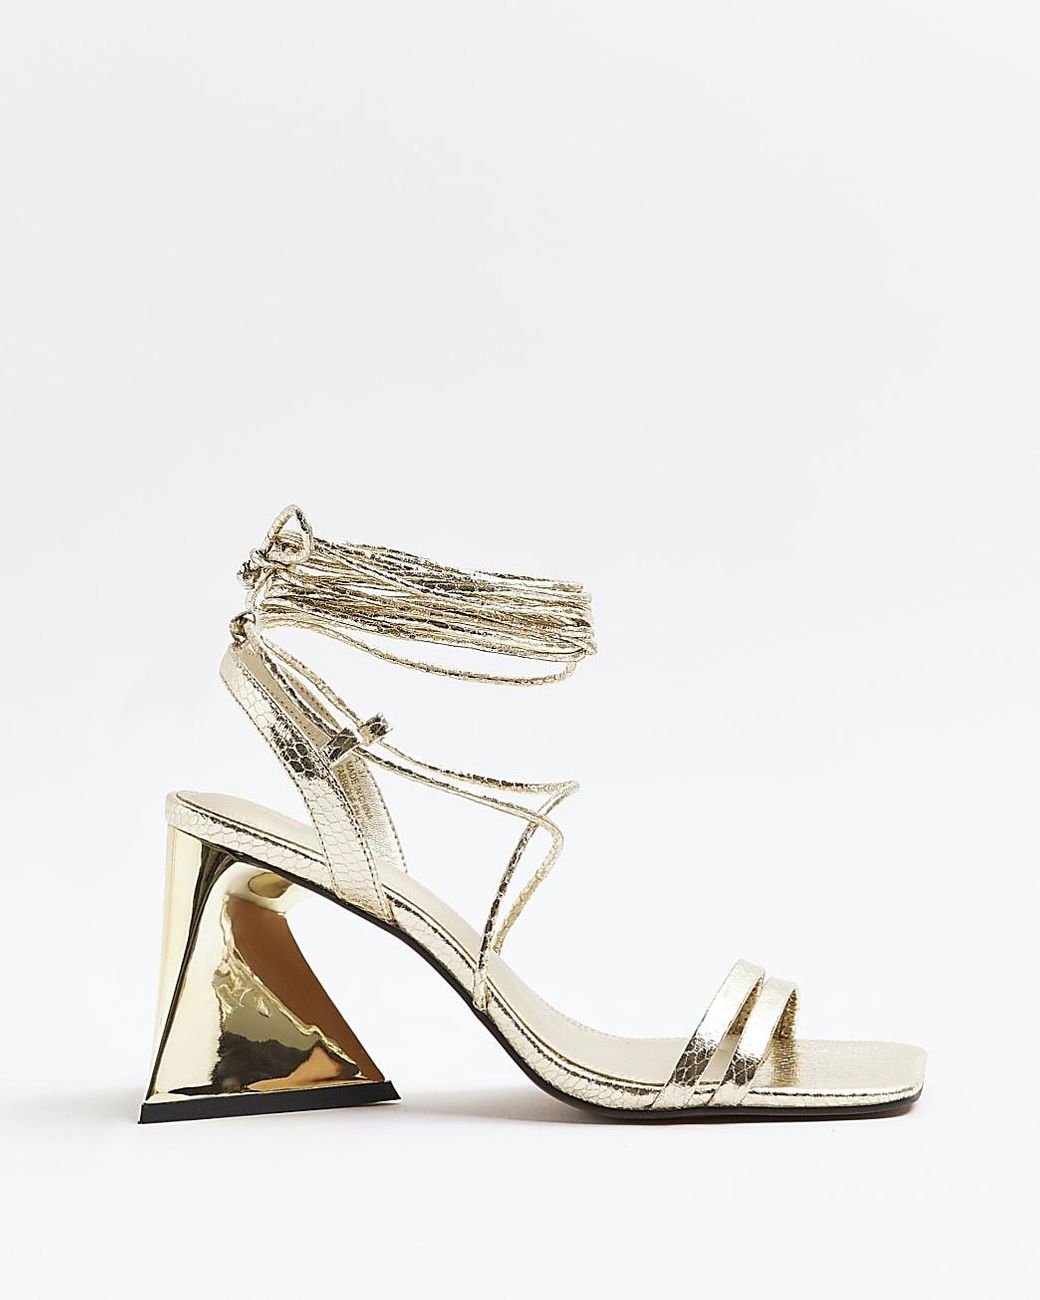 River Island Gold Heeled Sandals in White | Lyst